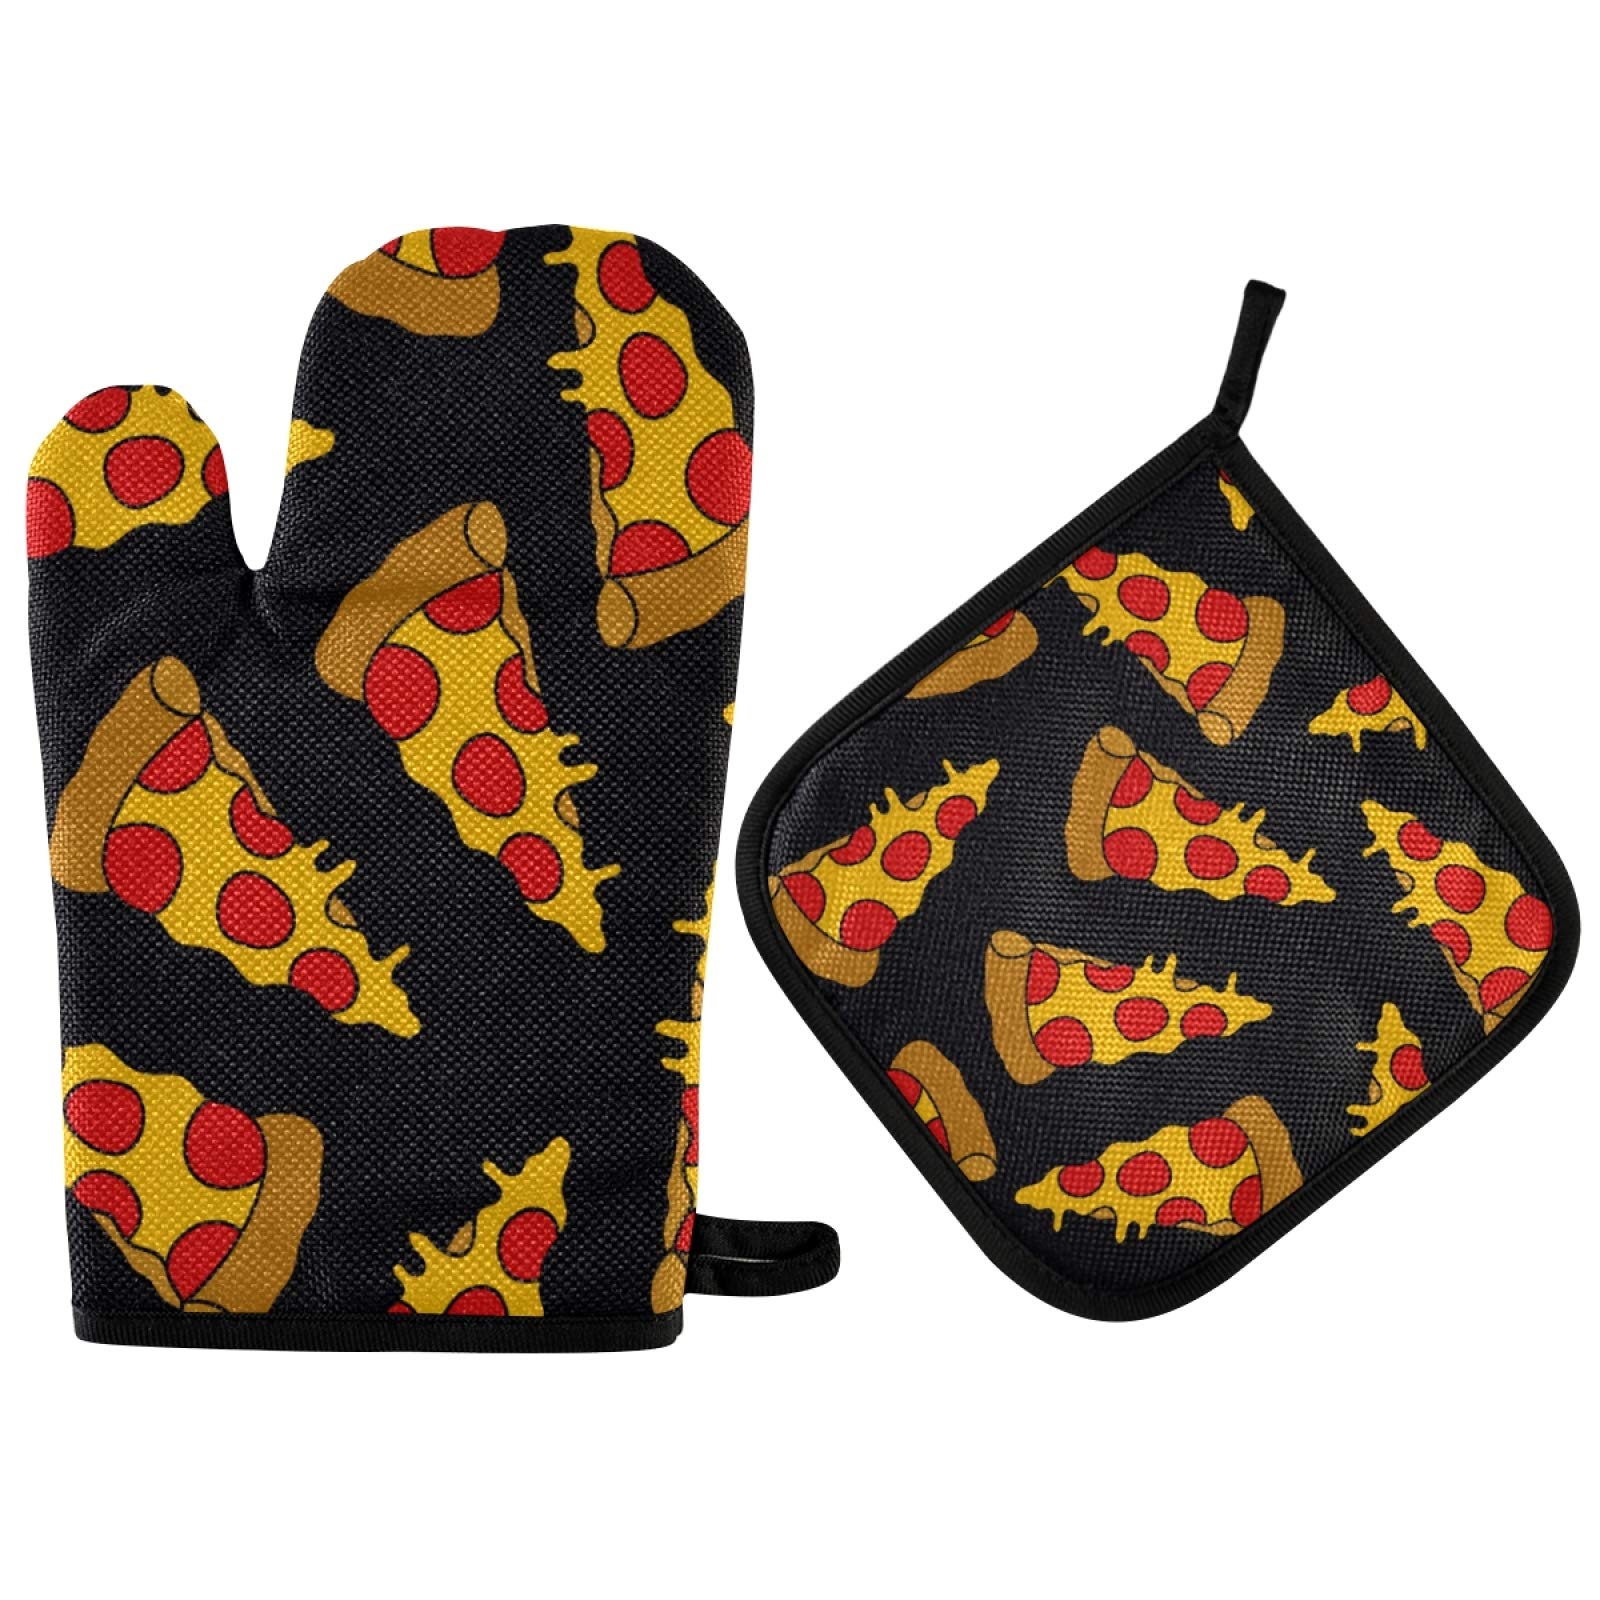 Pepperoni Pizza Heat-Resistant Oven Mitts and Pot HolderTexture Kitchen Non-Slip Cooking Microwave Gloves for Cooking Baking